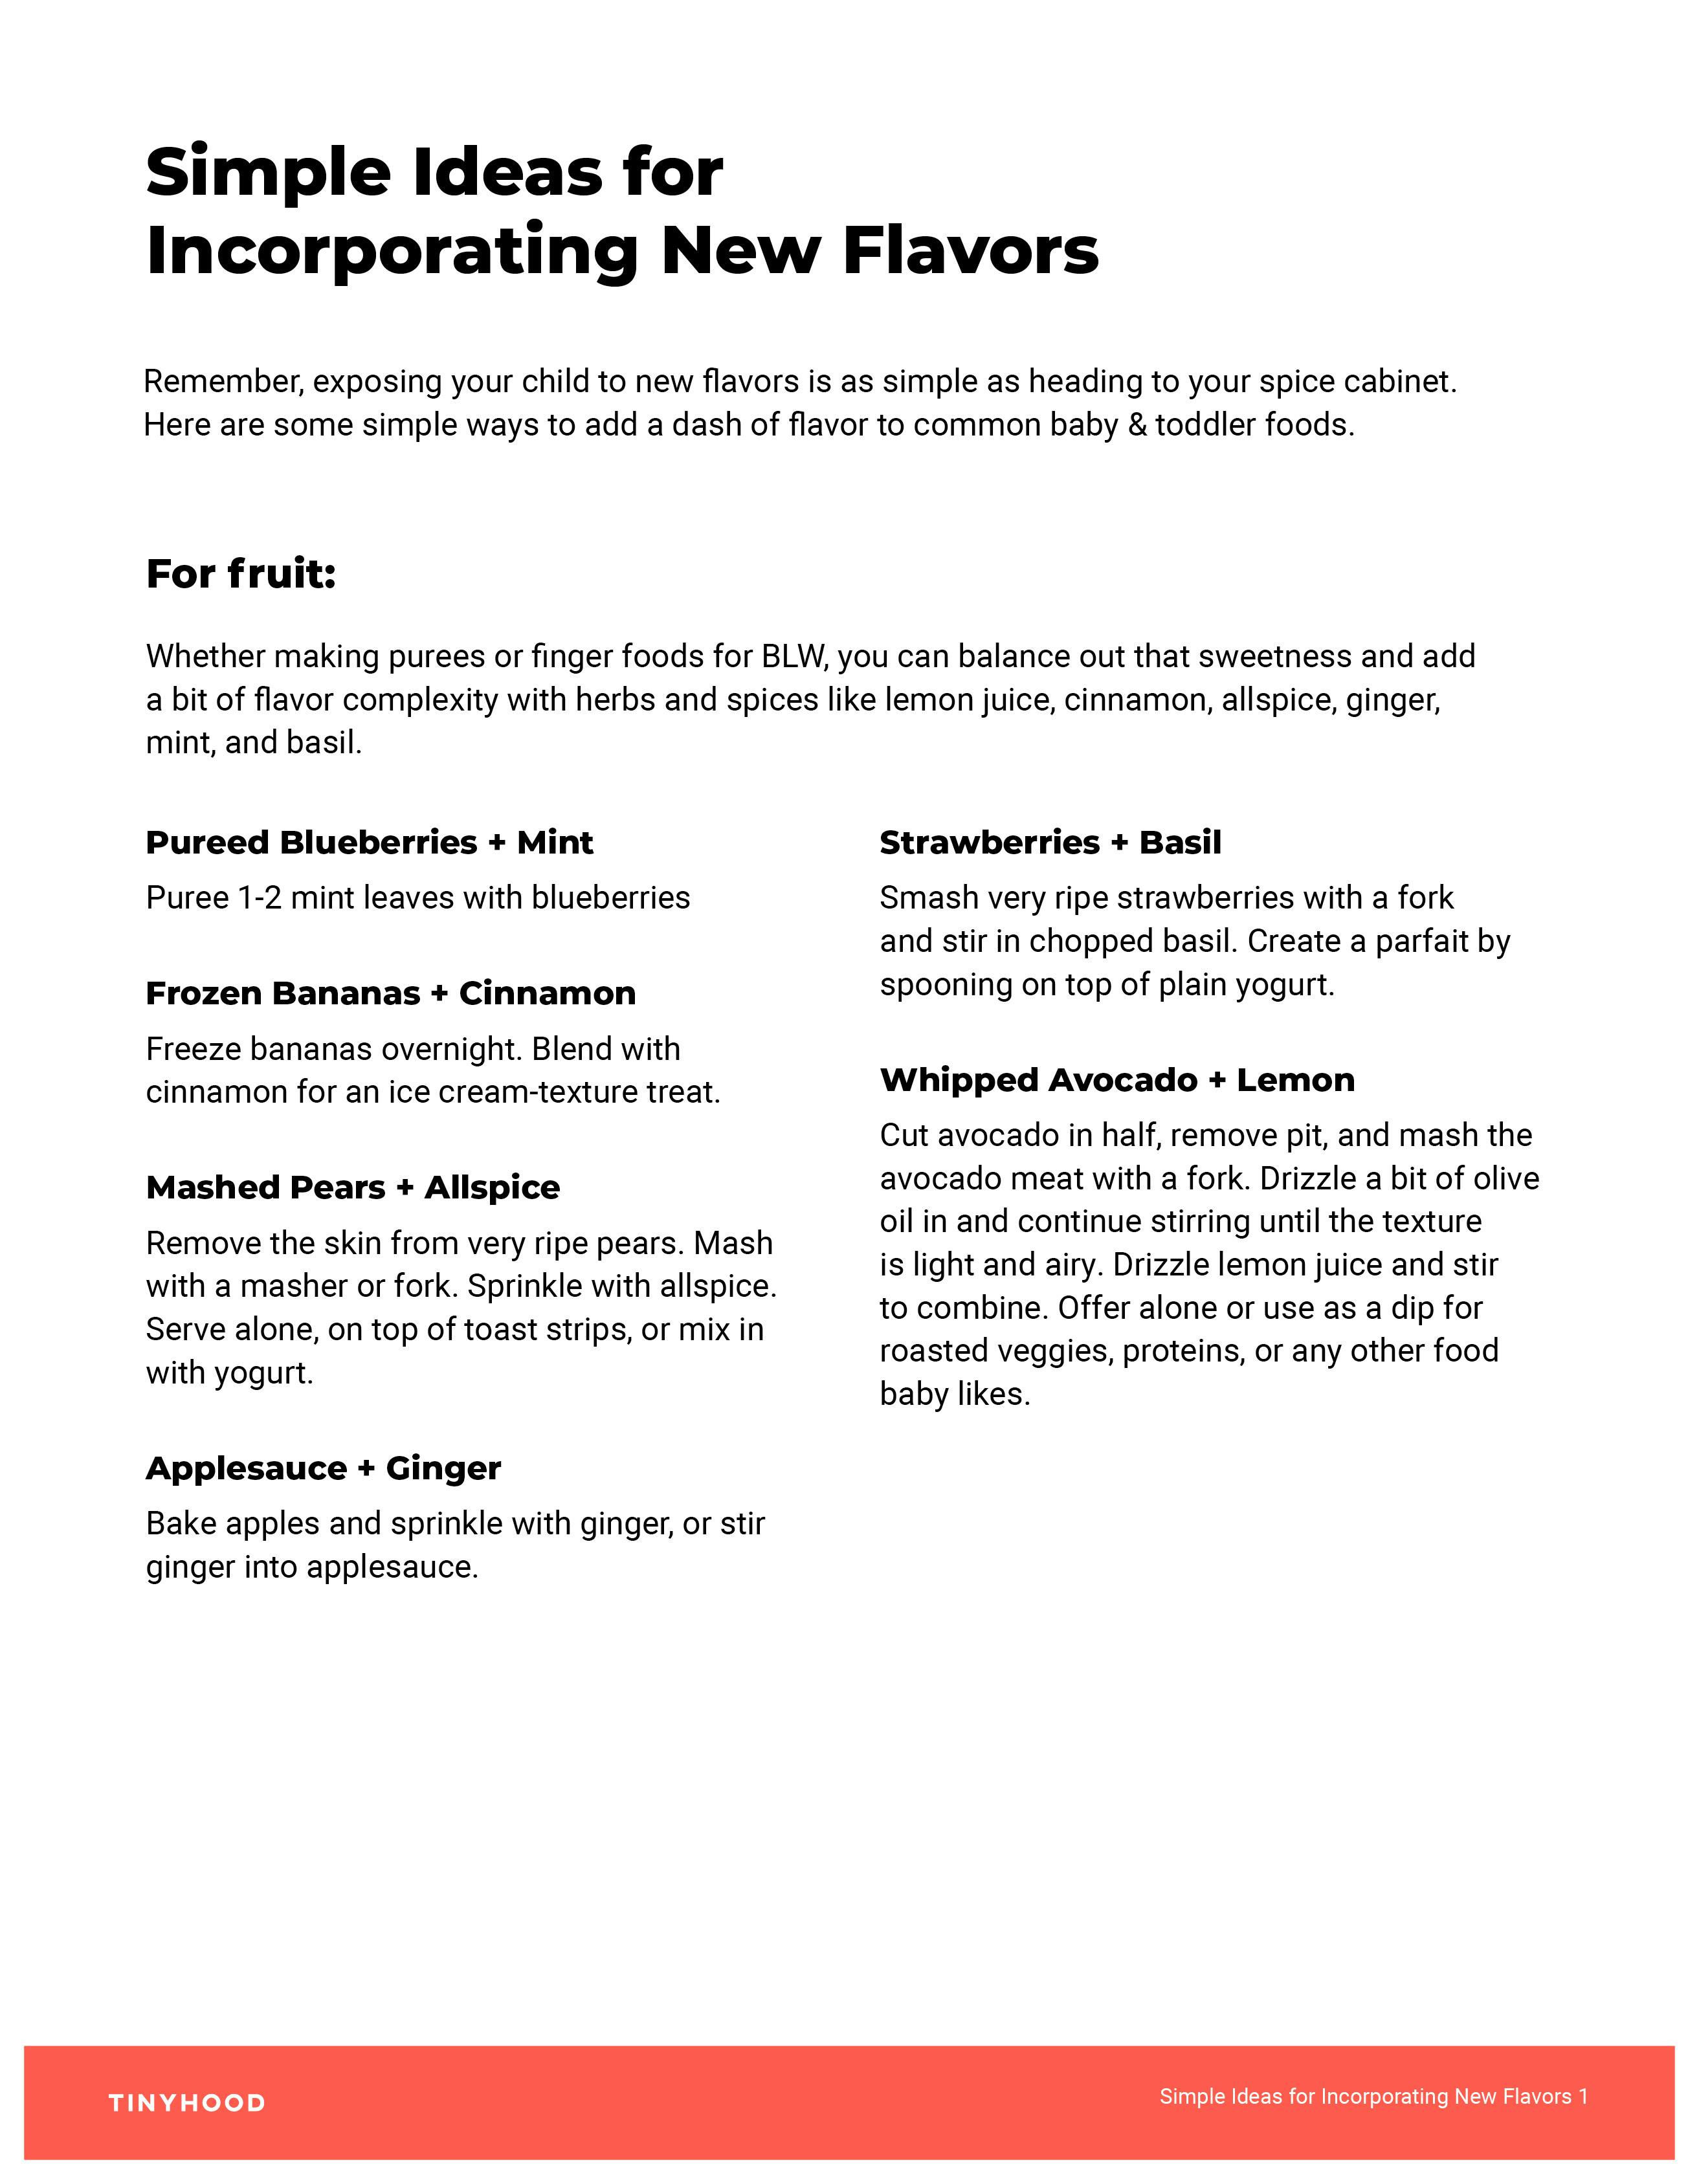 Preview image of Handout: Simple Ideas for Incorporating New Flavors